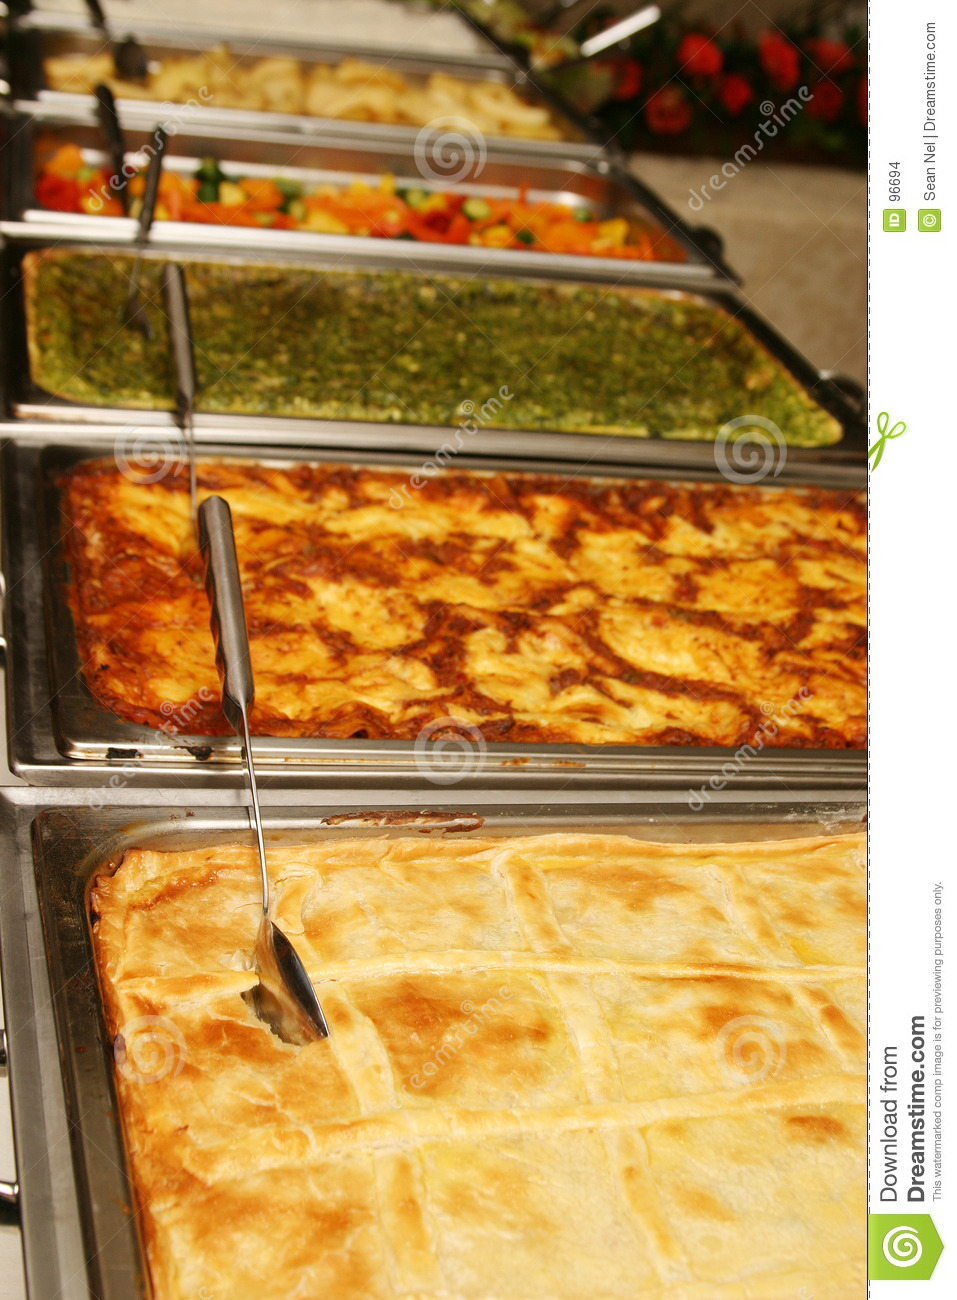 Buffet Line Stock Images   Image  96694